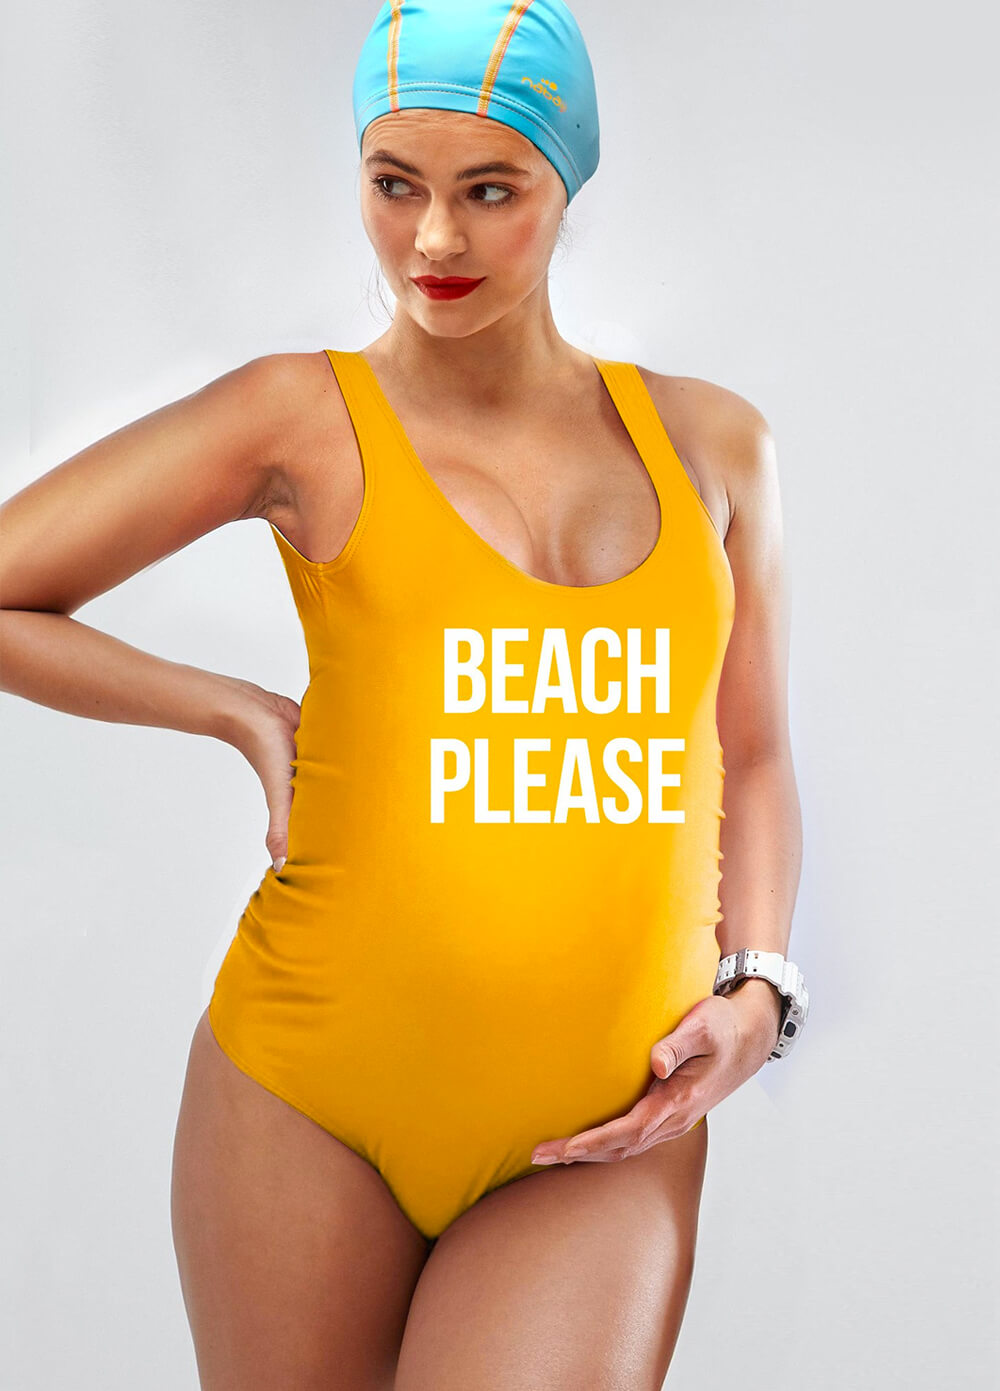 Beach Please Maternity One Piece Swimsuit in Orange by Mamagama